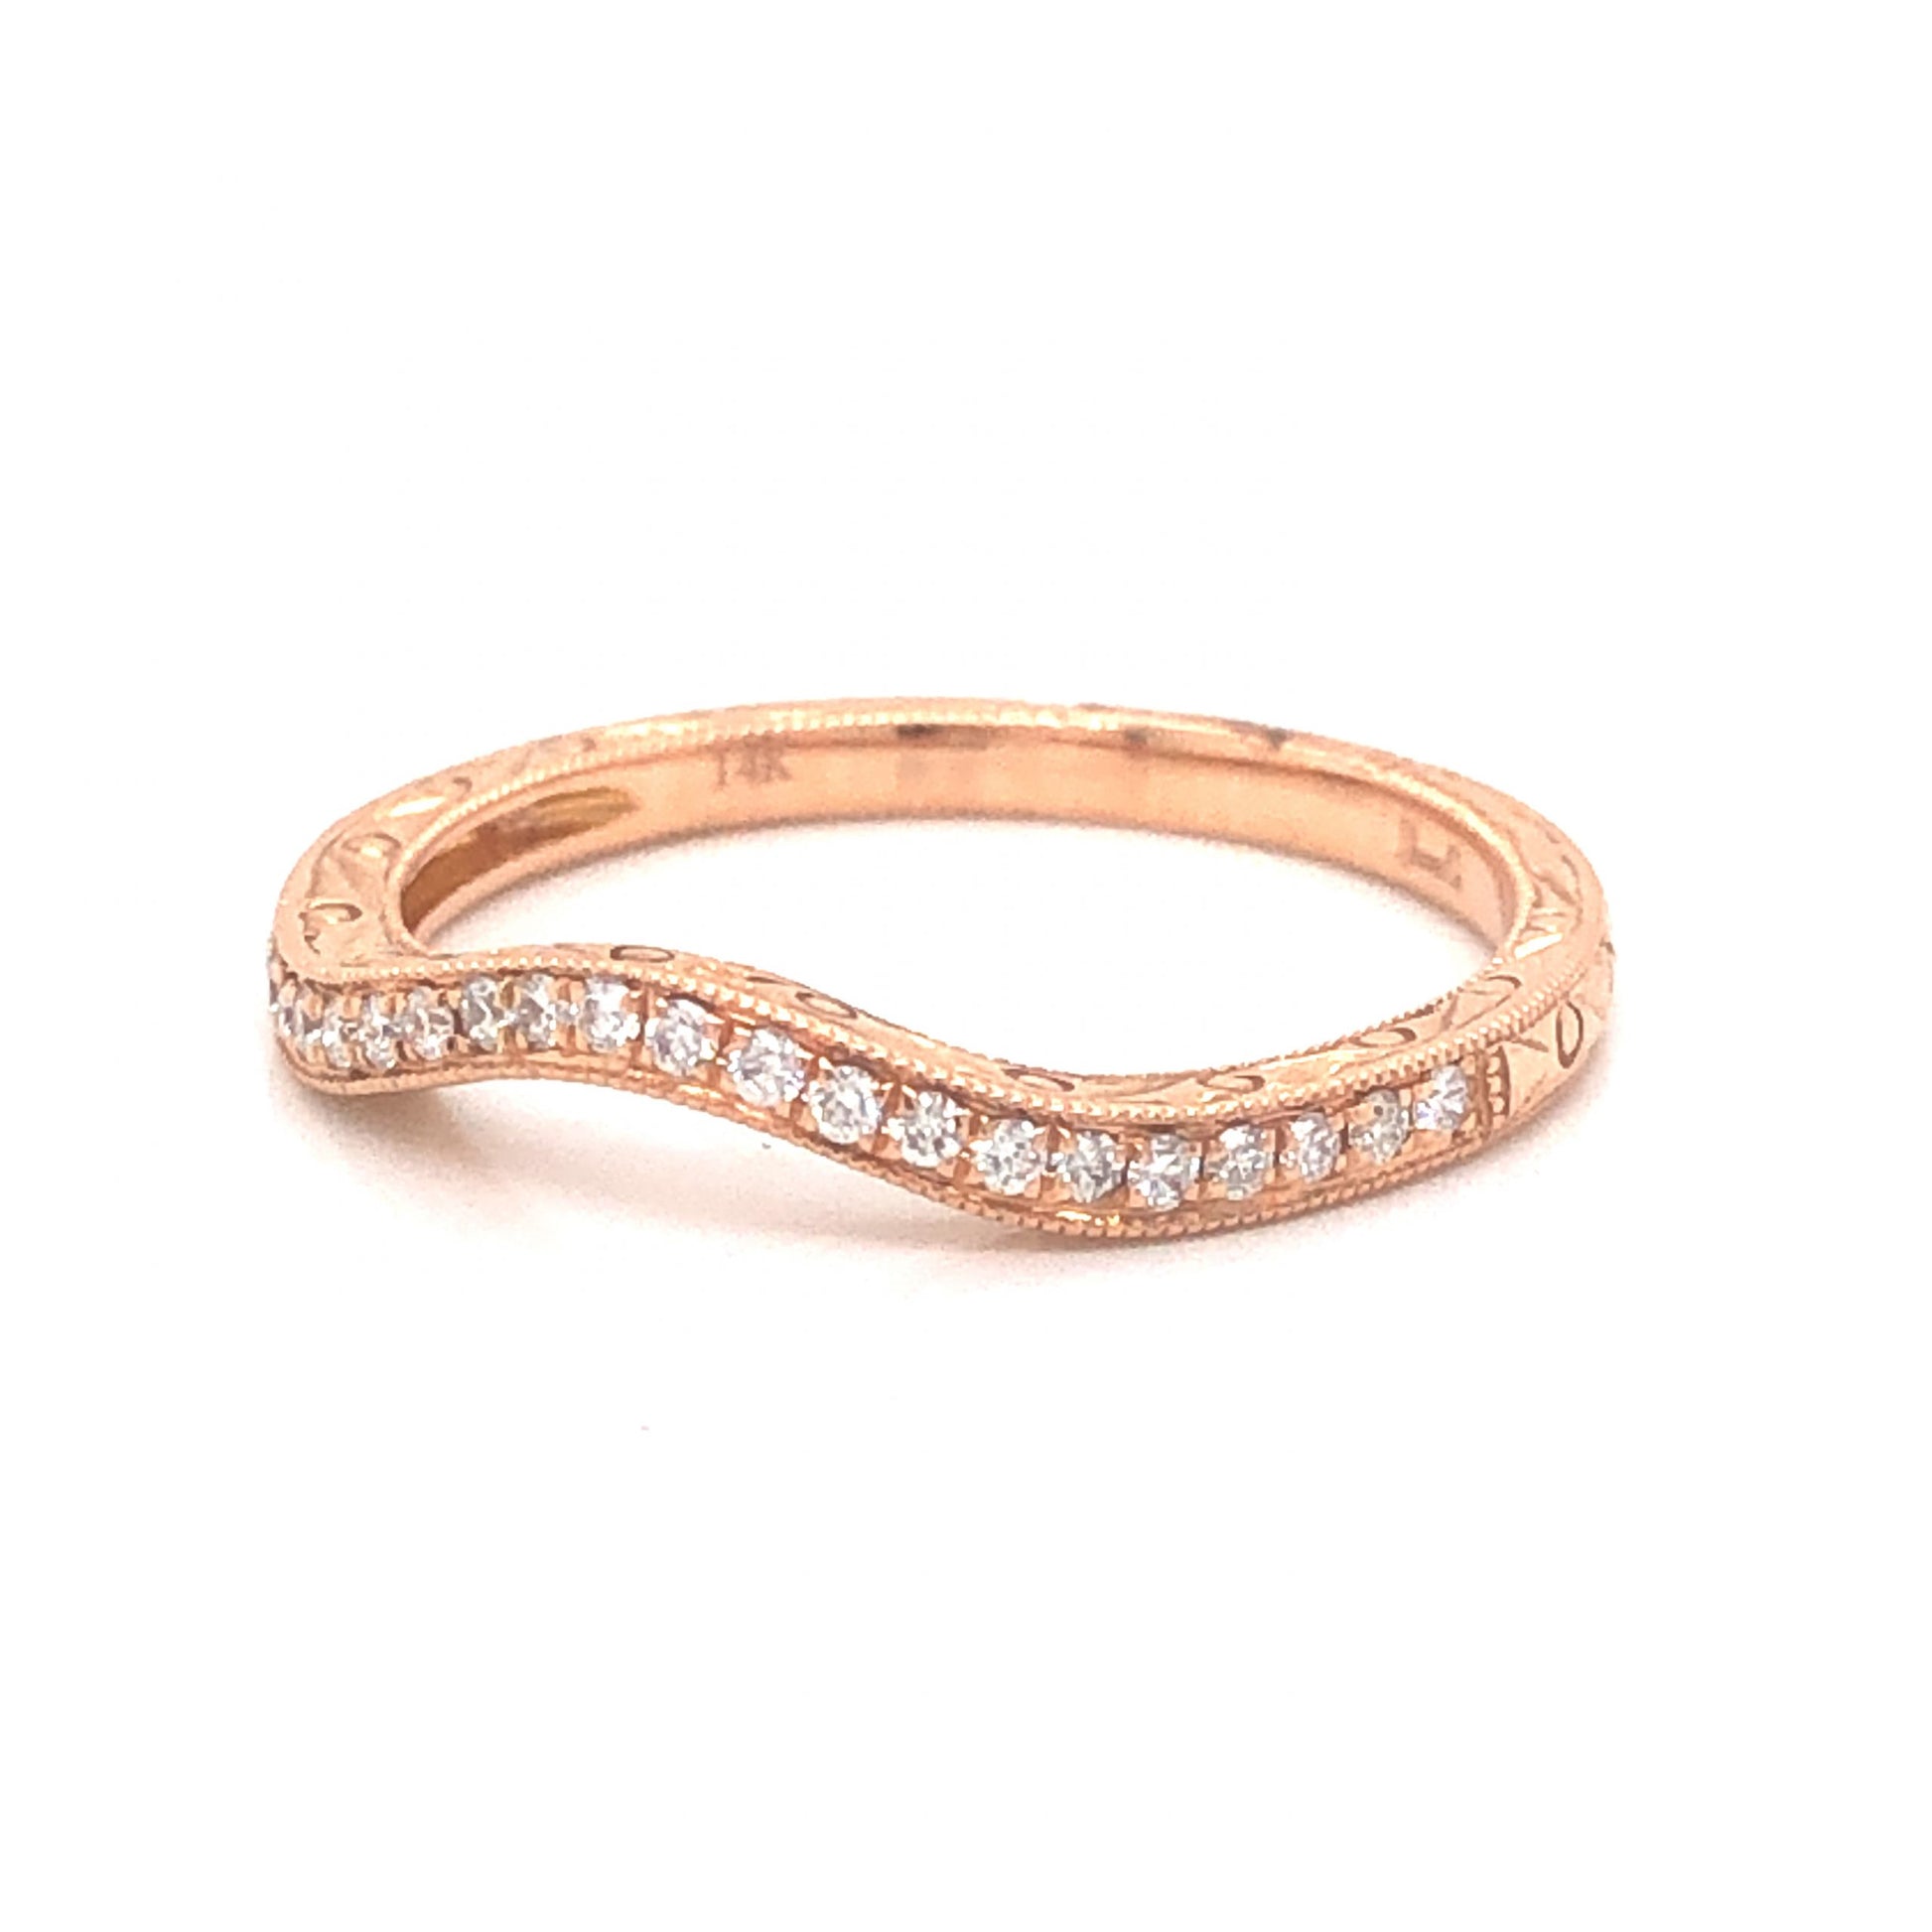 .11 Engraved Curved Diamond Wedding Band in 14k Rose GoldComposition: 14 Karat Rose Gold Ring Size: 6 Total Diamond Weight: .115ct Total Gram Weight: 1.7 g Inscription: 14k 
      